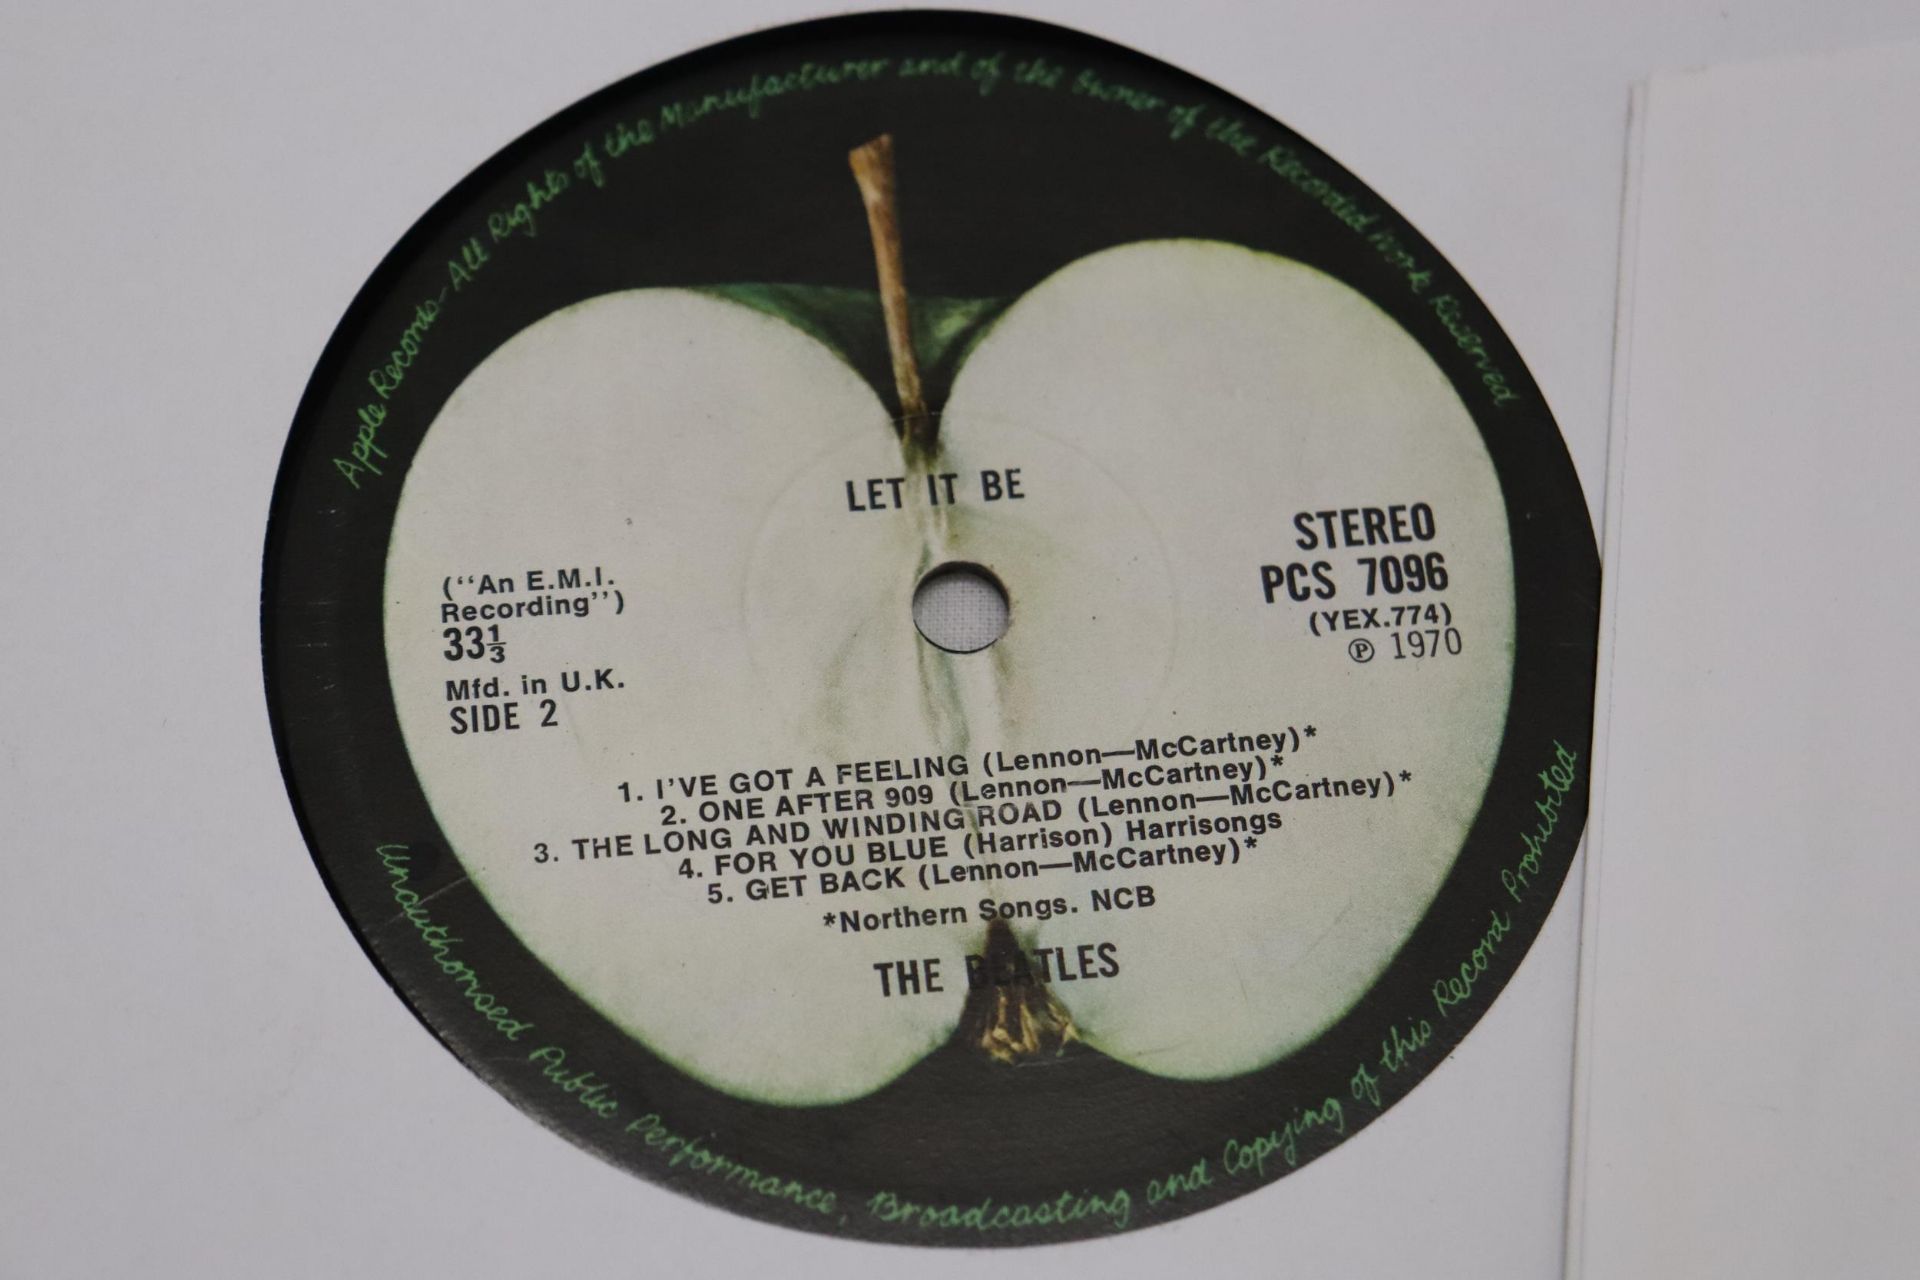 TWO BEATLES LP'S - LET IT BE (1970) AND THE BEATLES (1968) (NO COVERS) - Image 5 of 7